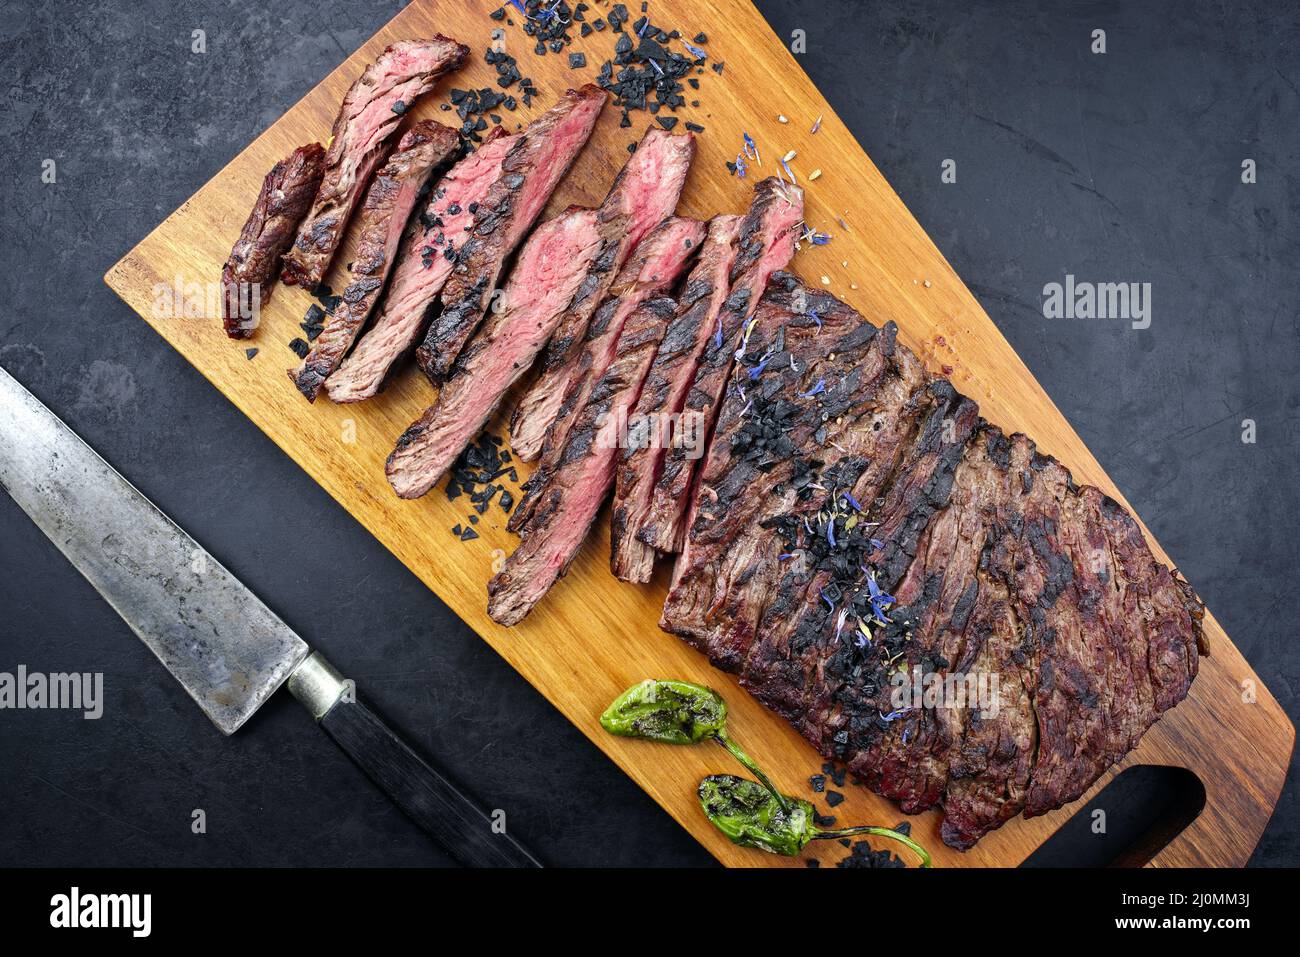 Modern style traditional barbecue wagyu bavette steak with green chili and spices served as top view on a wooden design board Stock Photo